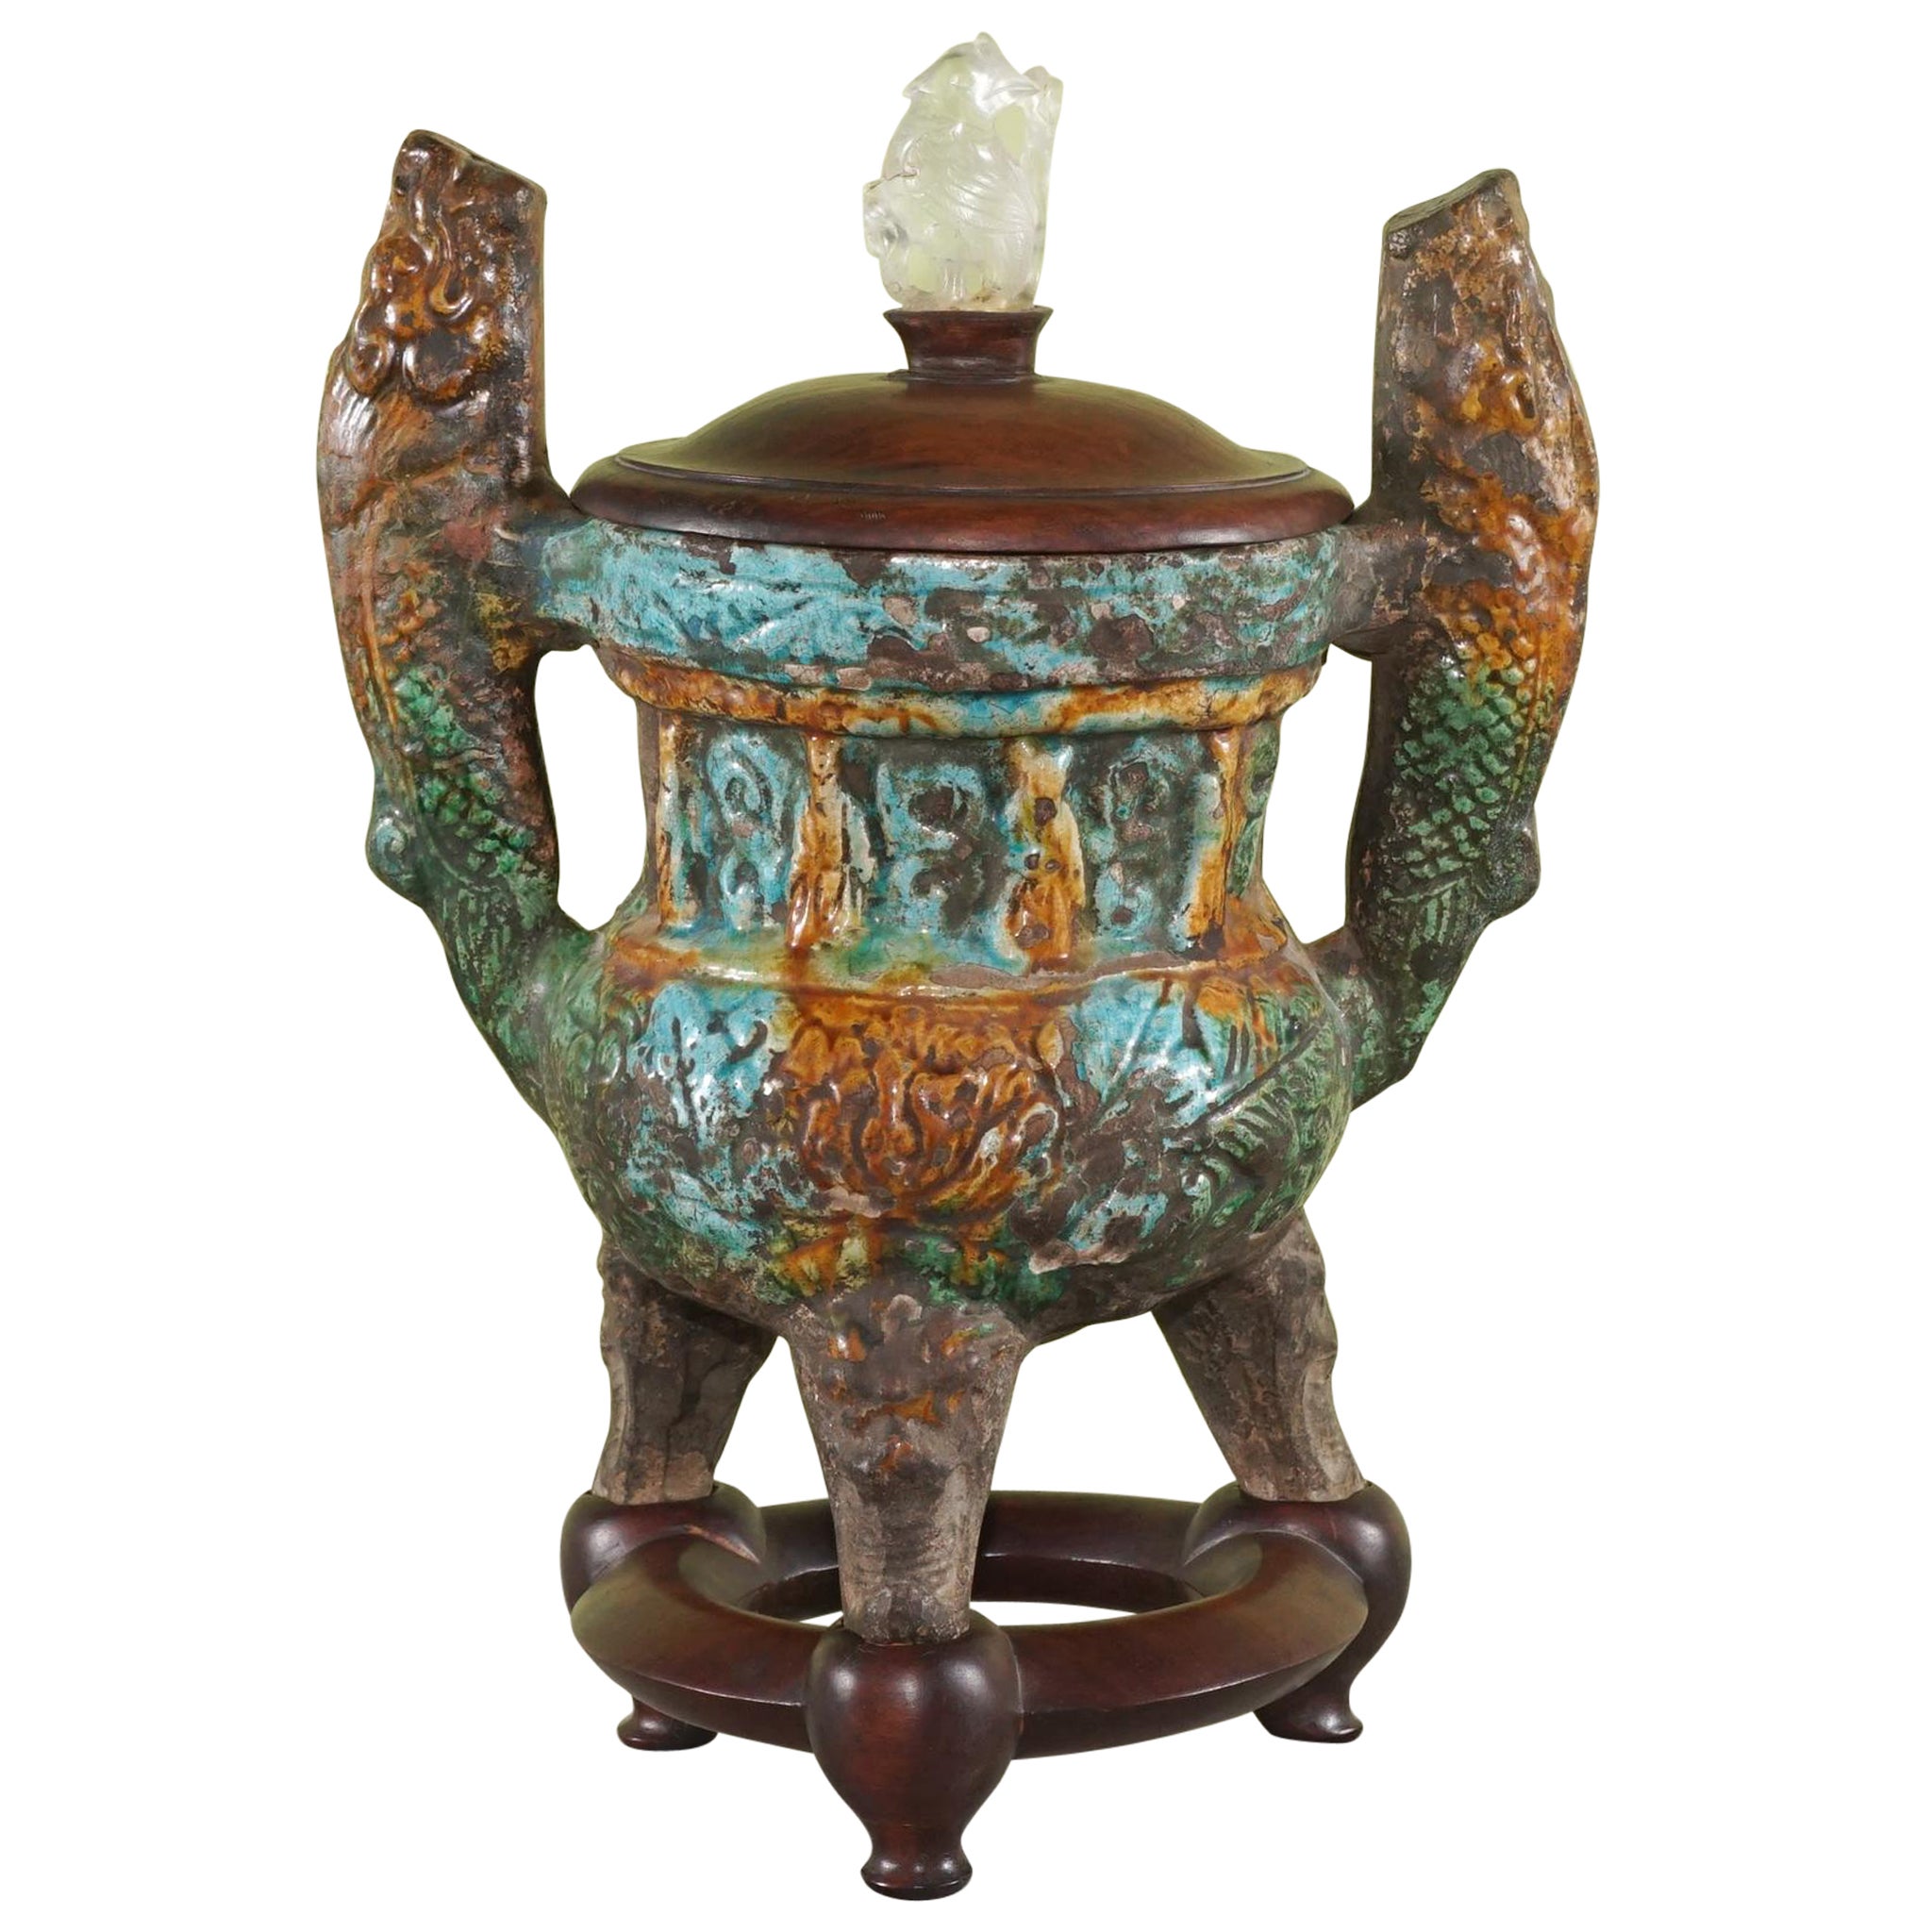 Chinese Ming period Dynasty Buddhist Incense Burner with a Rock Crystal Finial